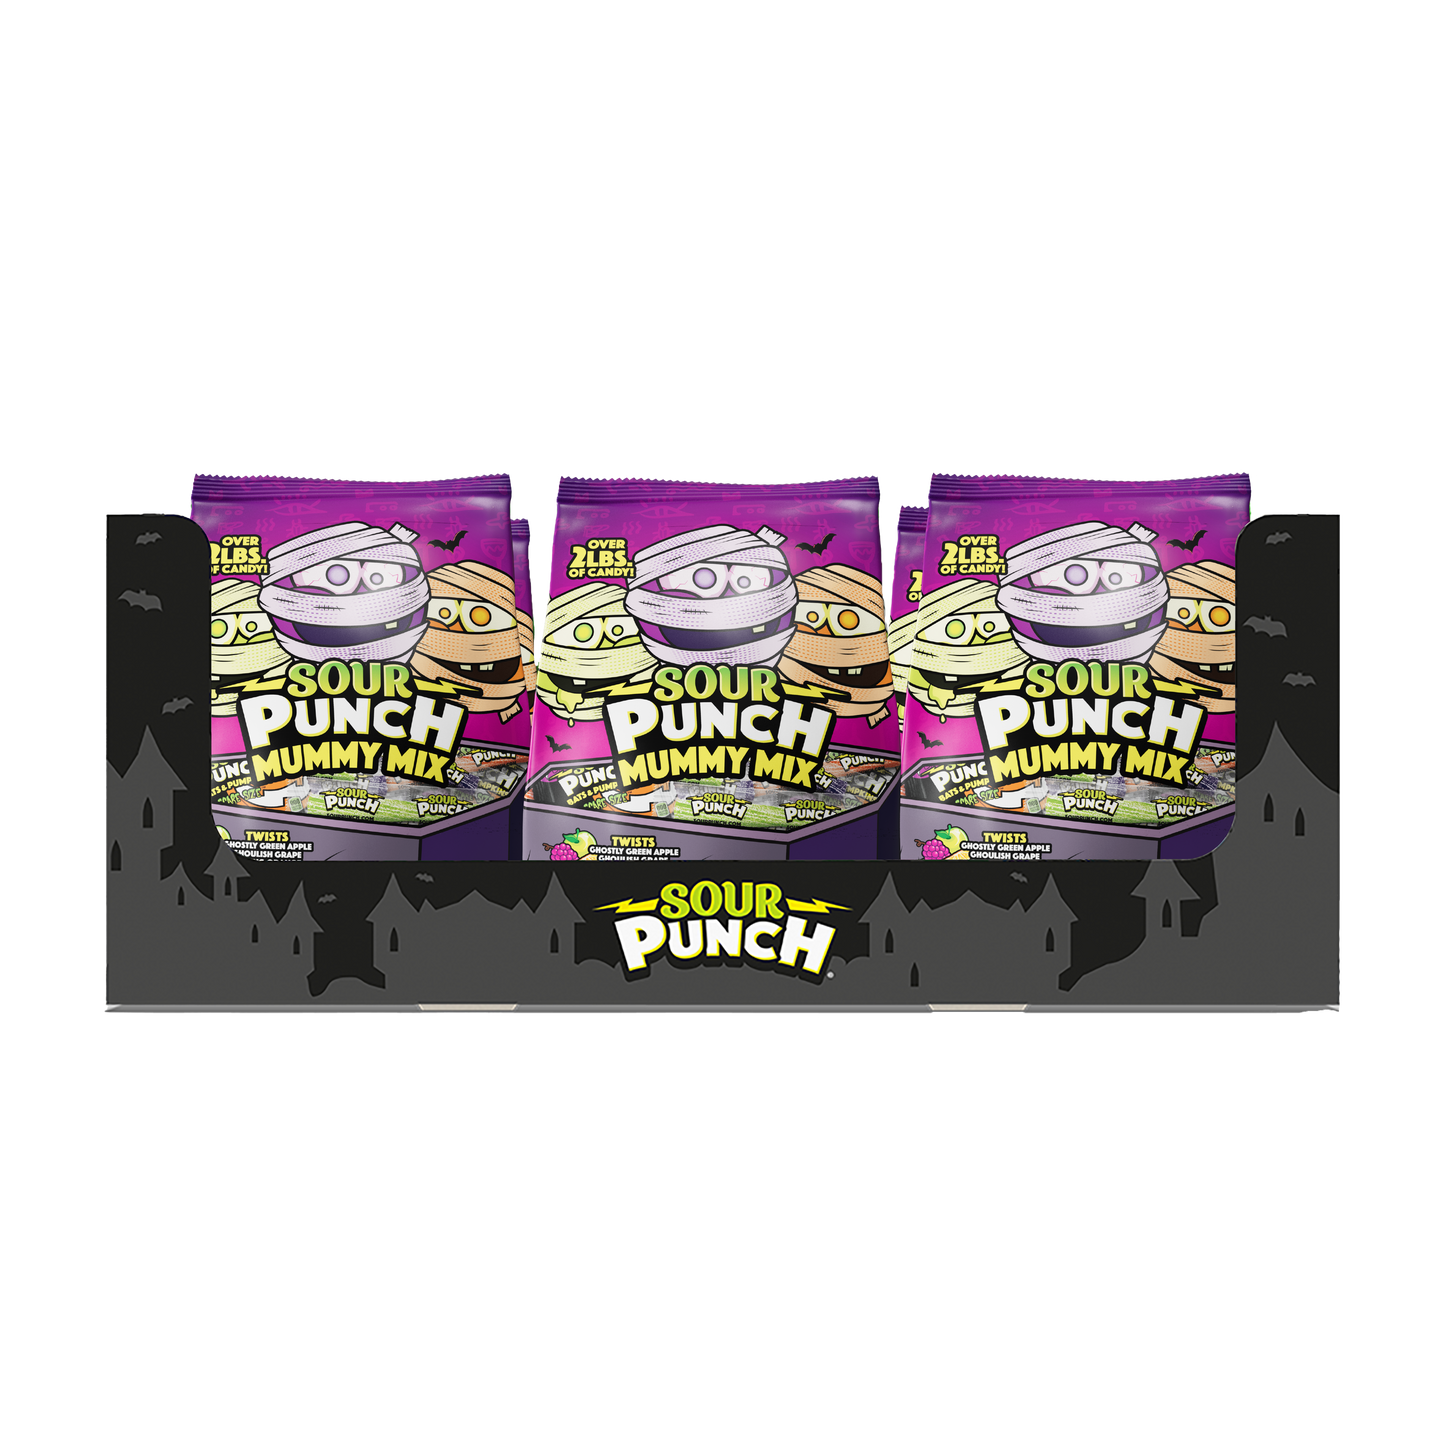 6-Pack of SOUR PUNCH Mummy Mix Halloween Candy 35oz Bags